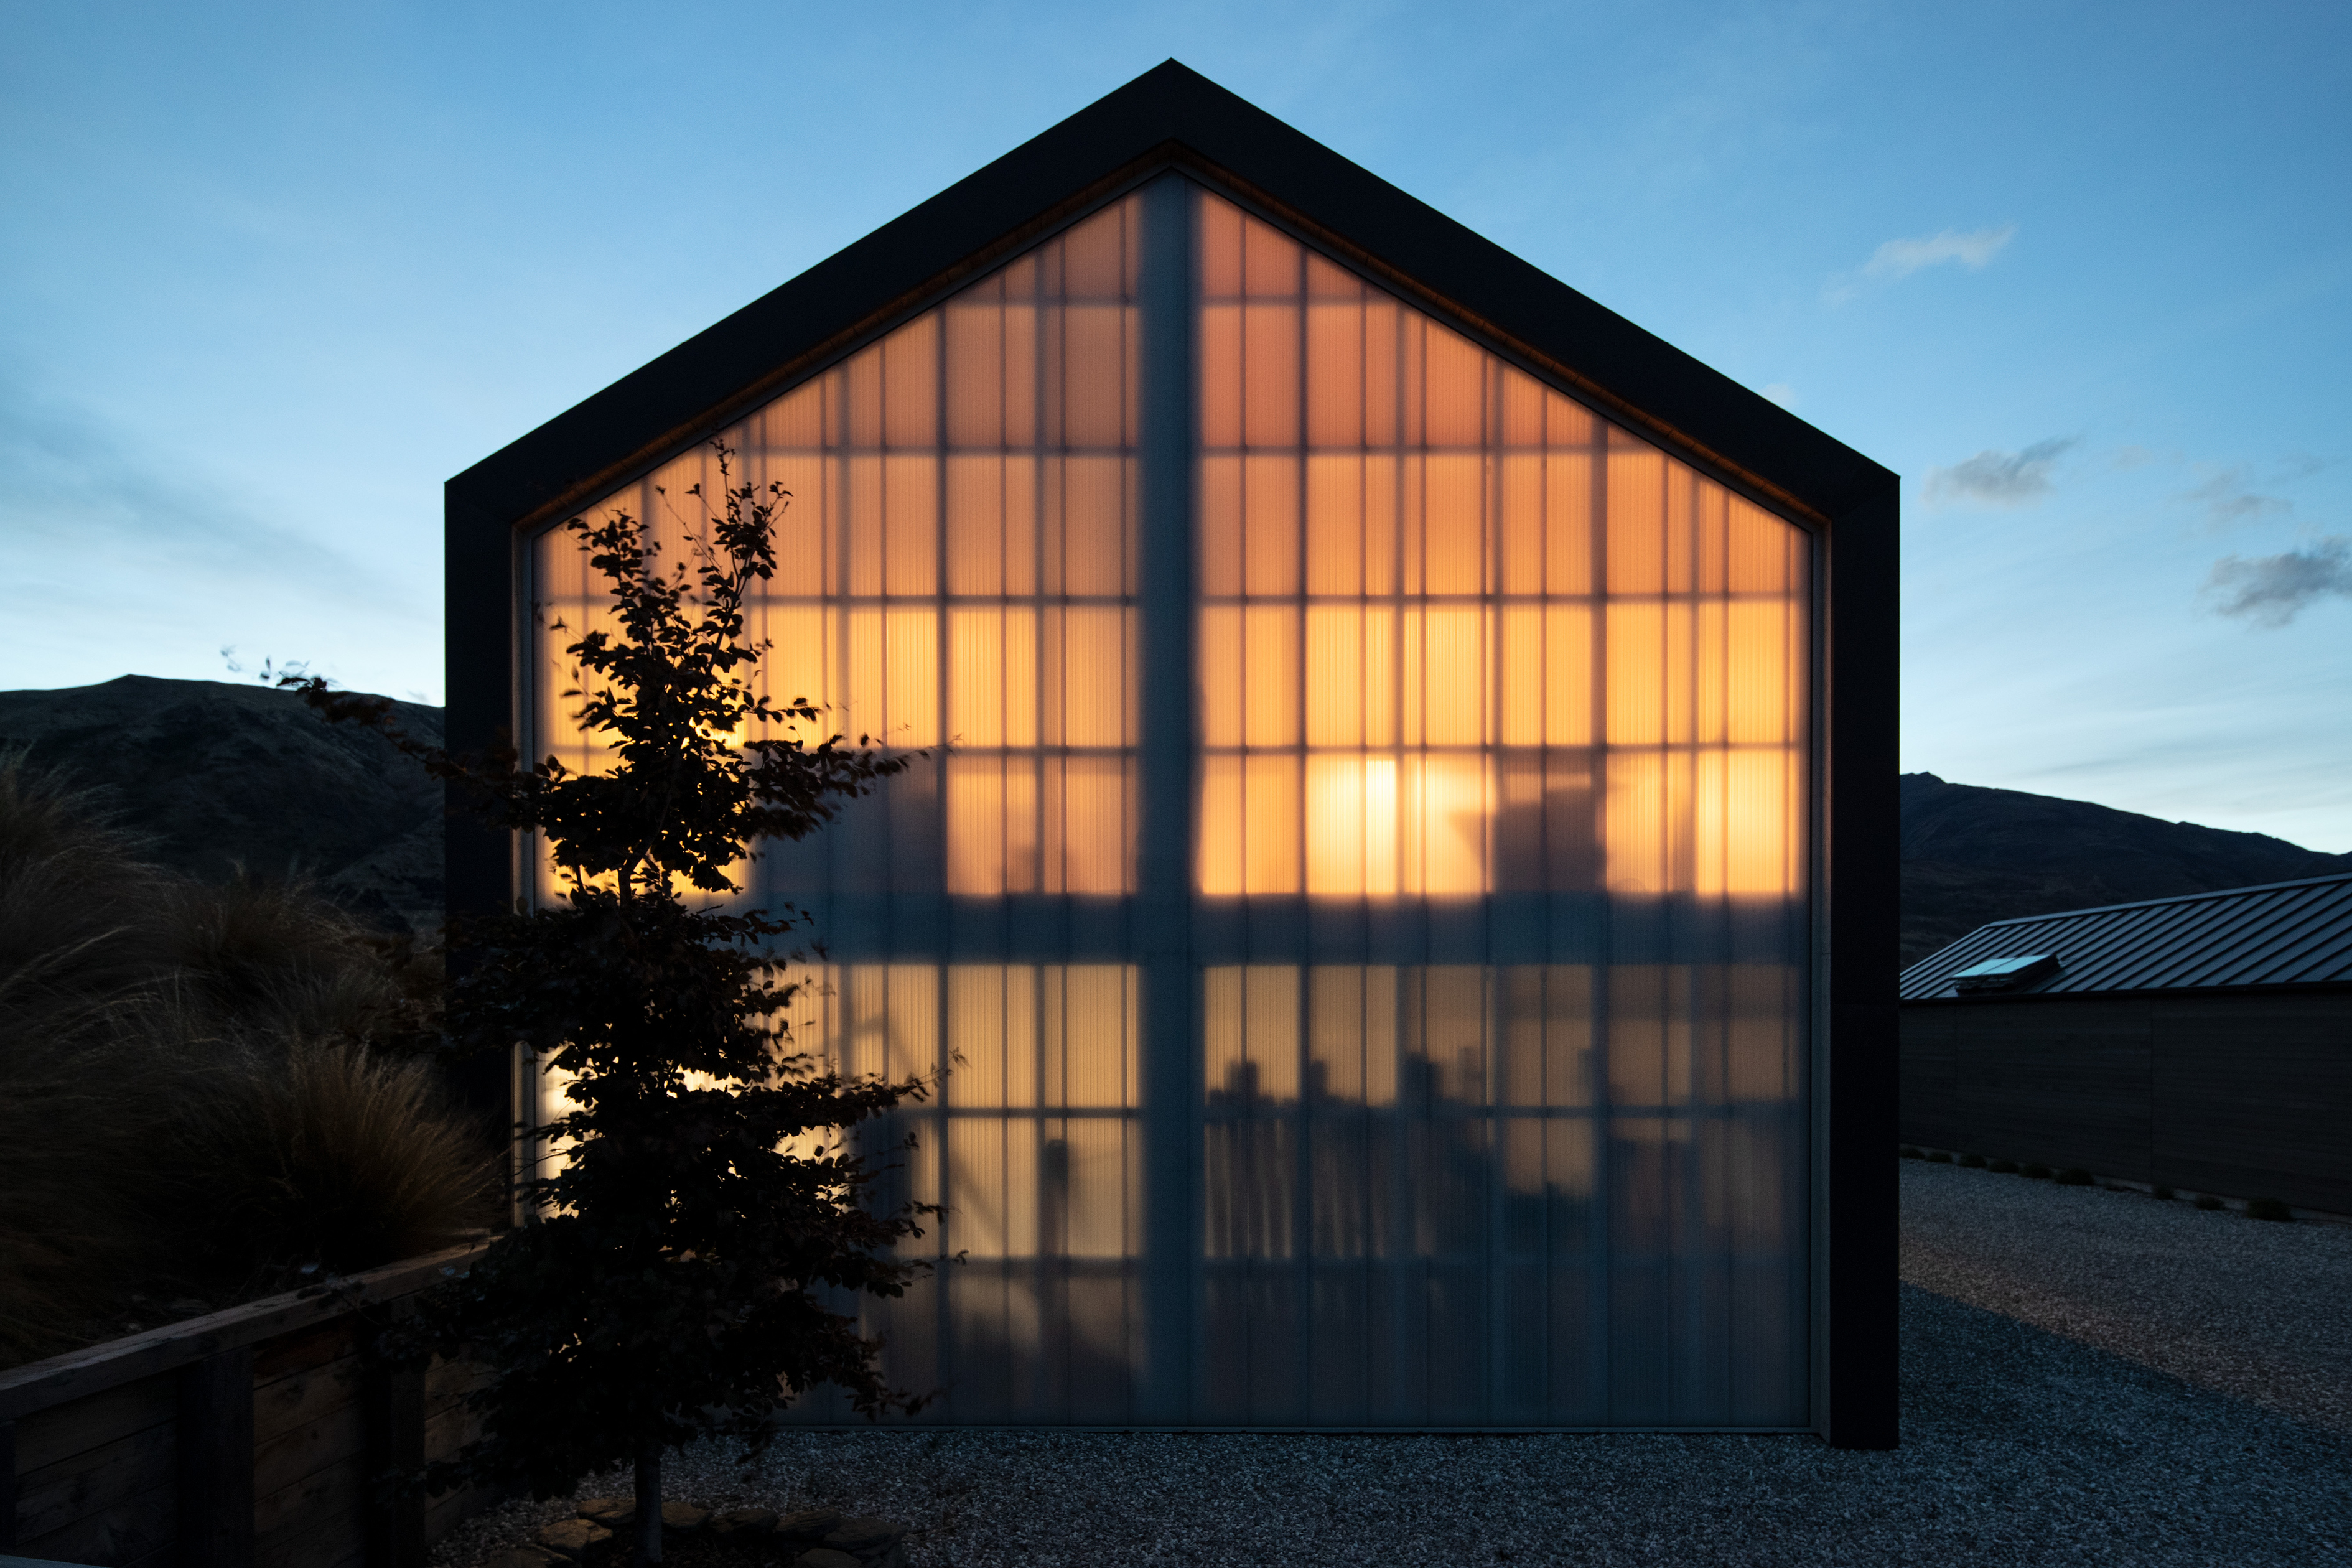 Exterior of Wanaka barn-style loft at night, with light shining through floor-to-sealing translucent polycarbonate